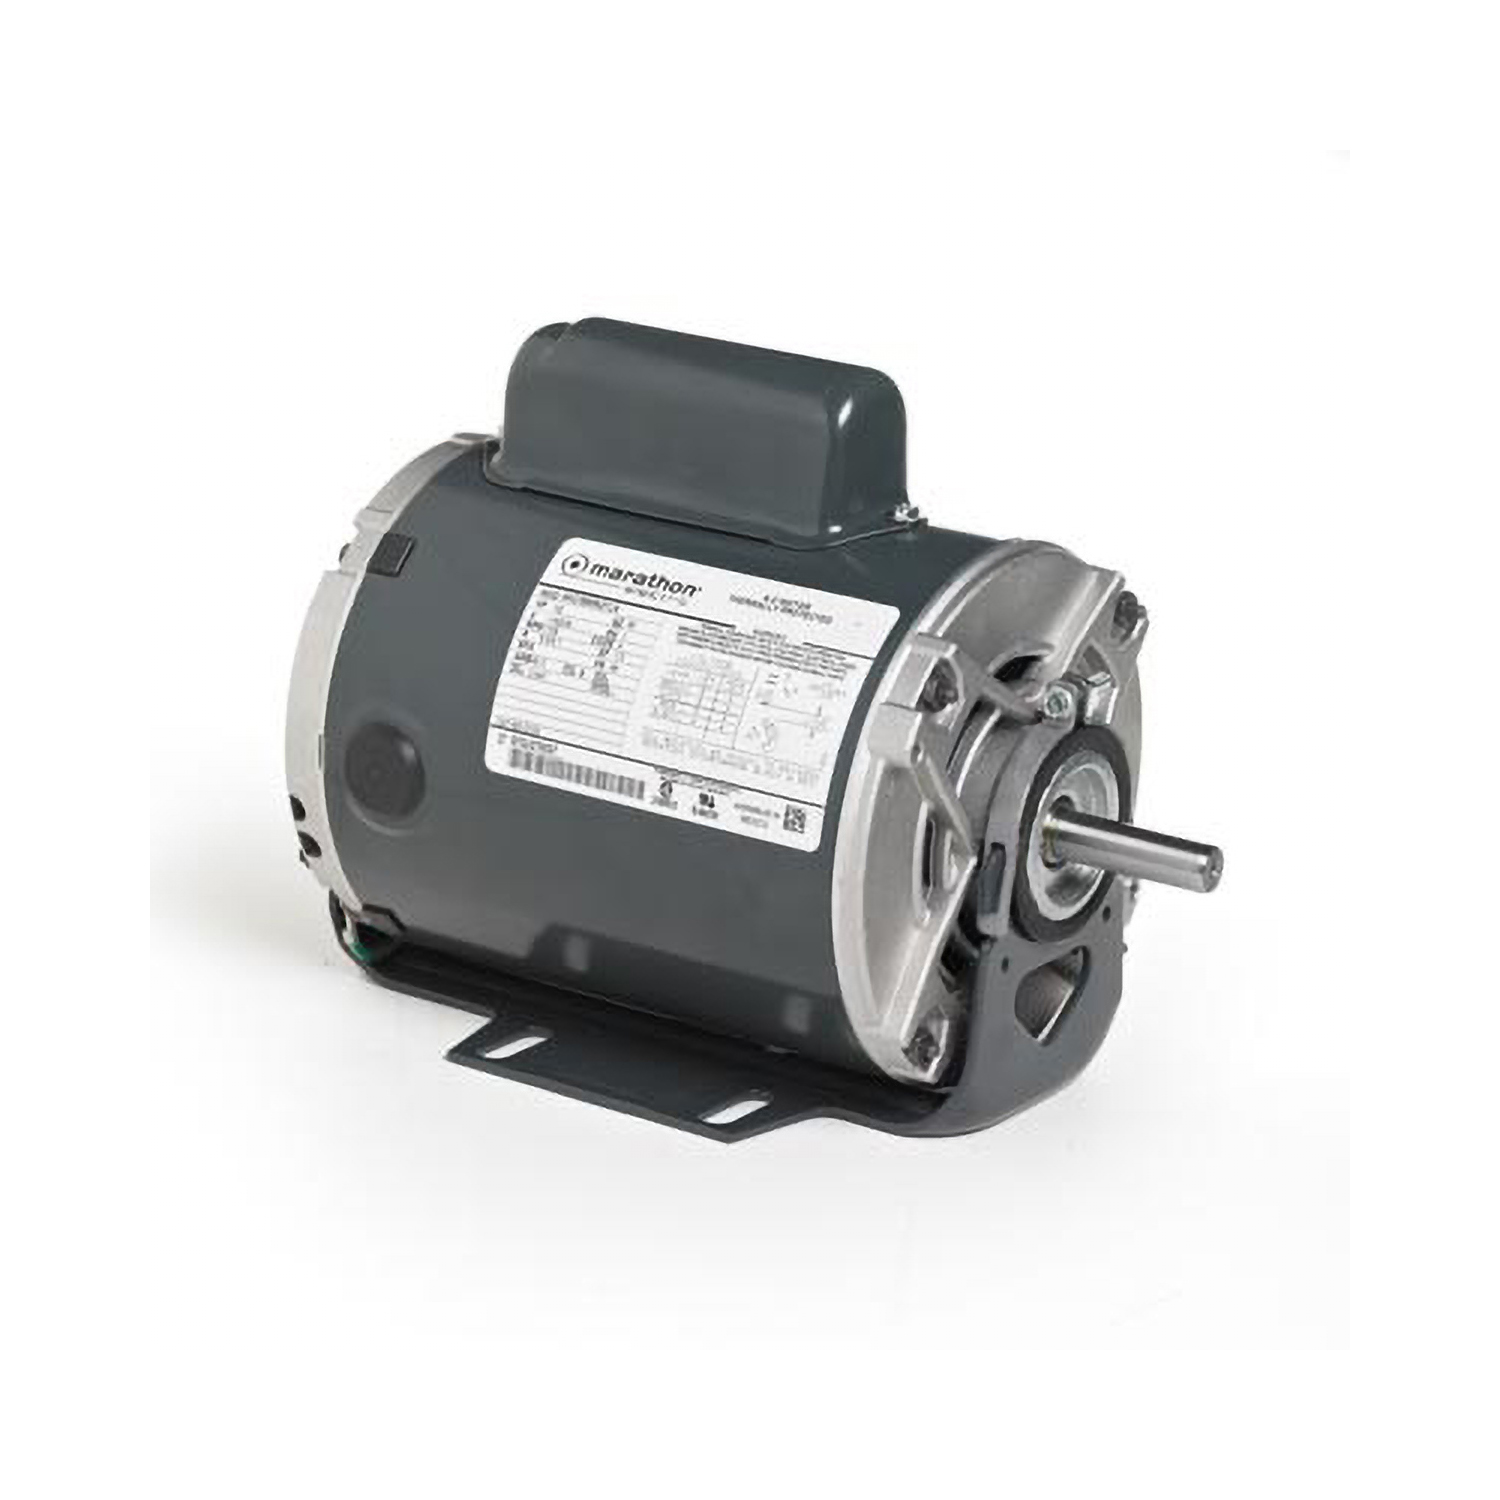 48 FR Capacitor Start Fan and Blower Duty Mtr, 1/2 HP, 1725 RPM, 115/230 V